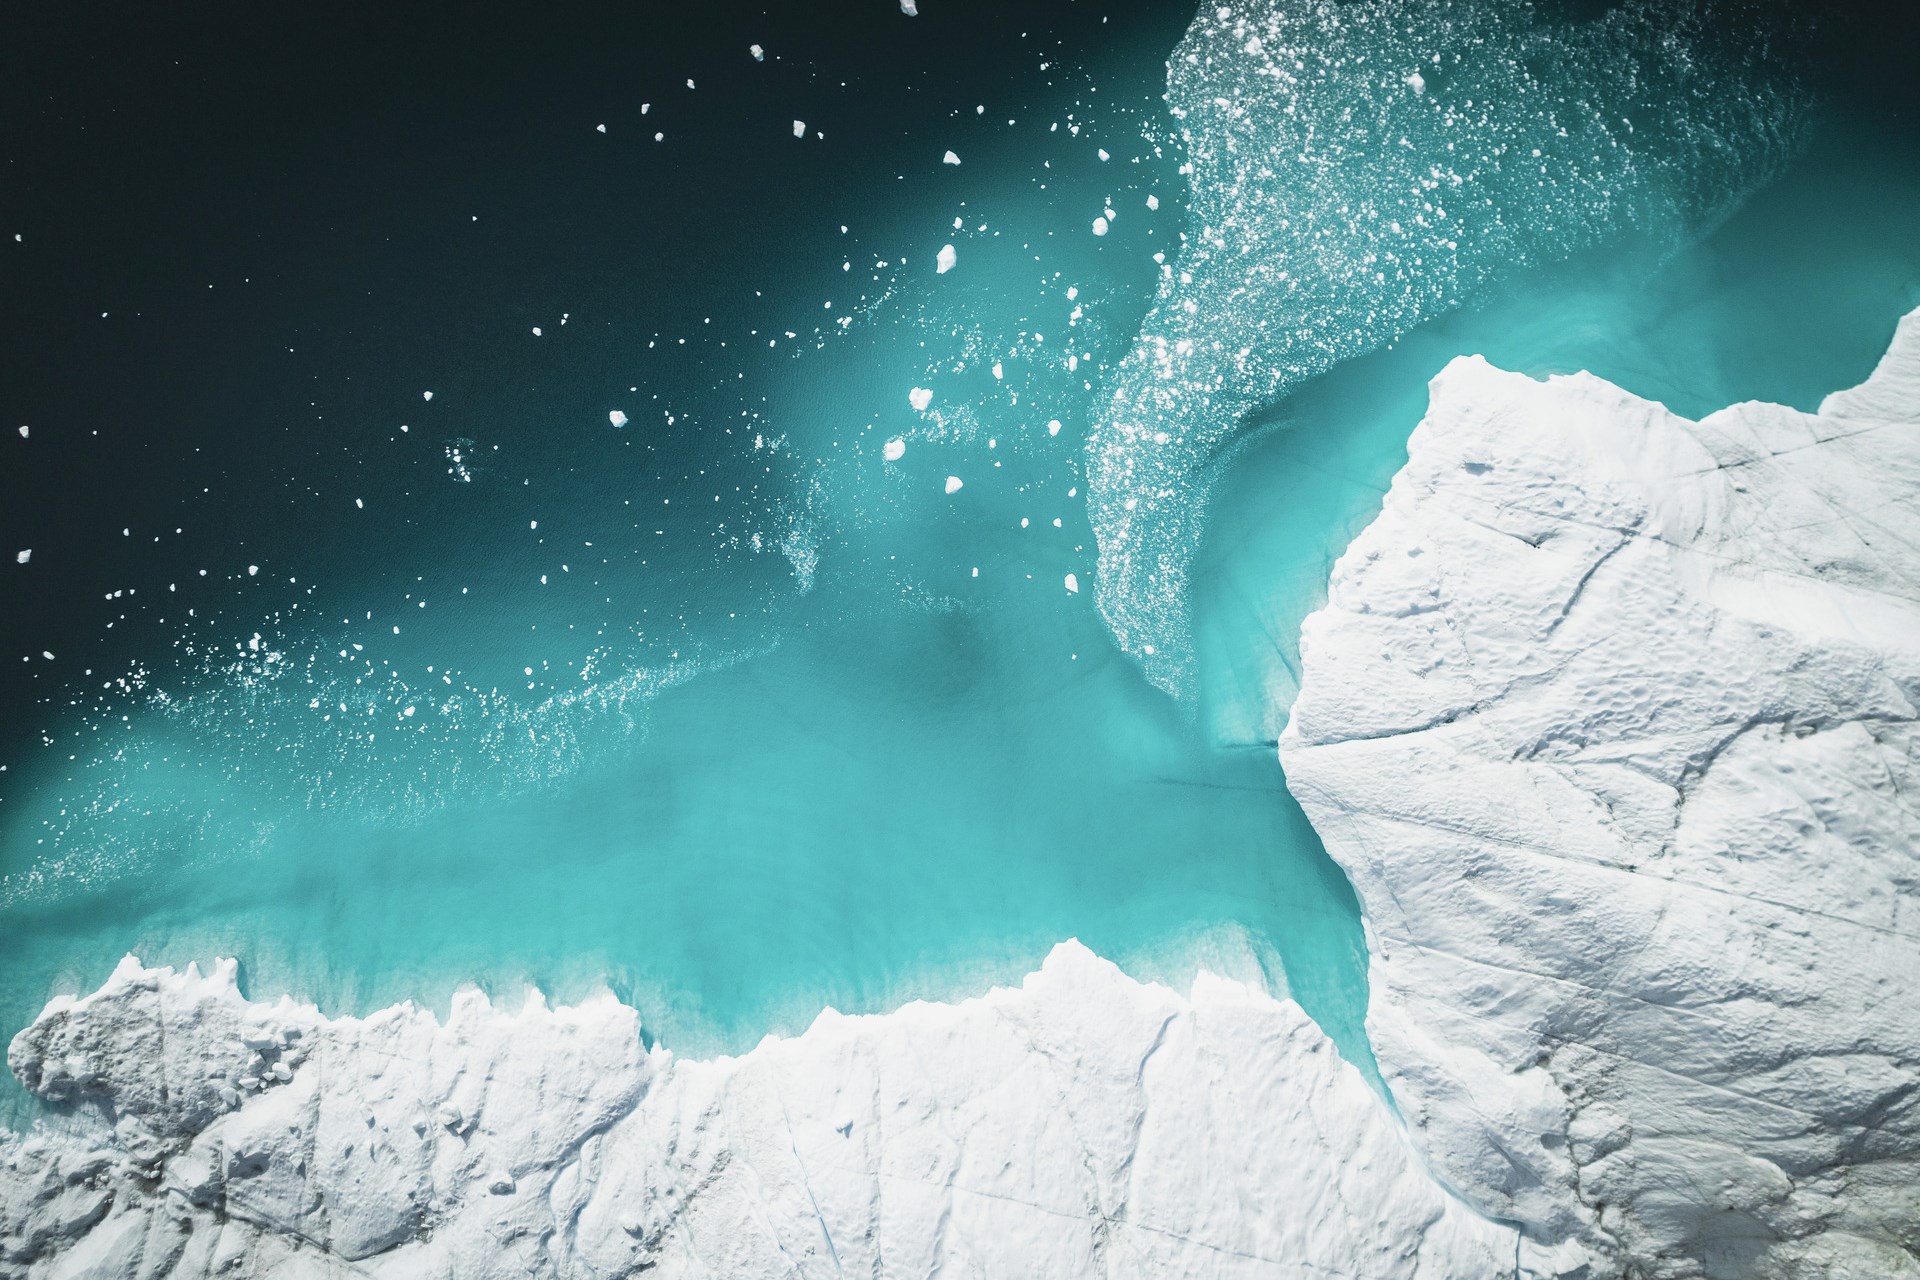 Bird's eye view of icebergs floating above the sea.